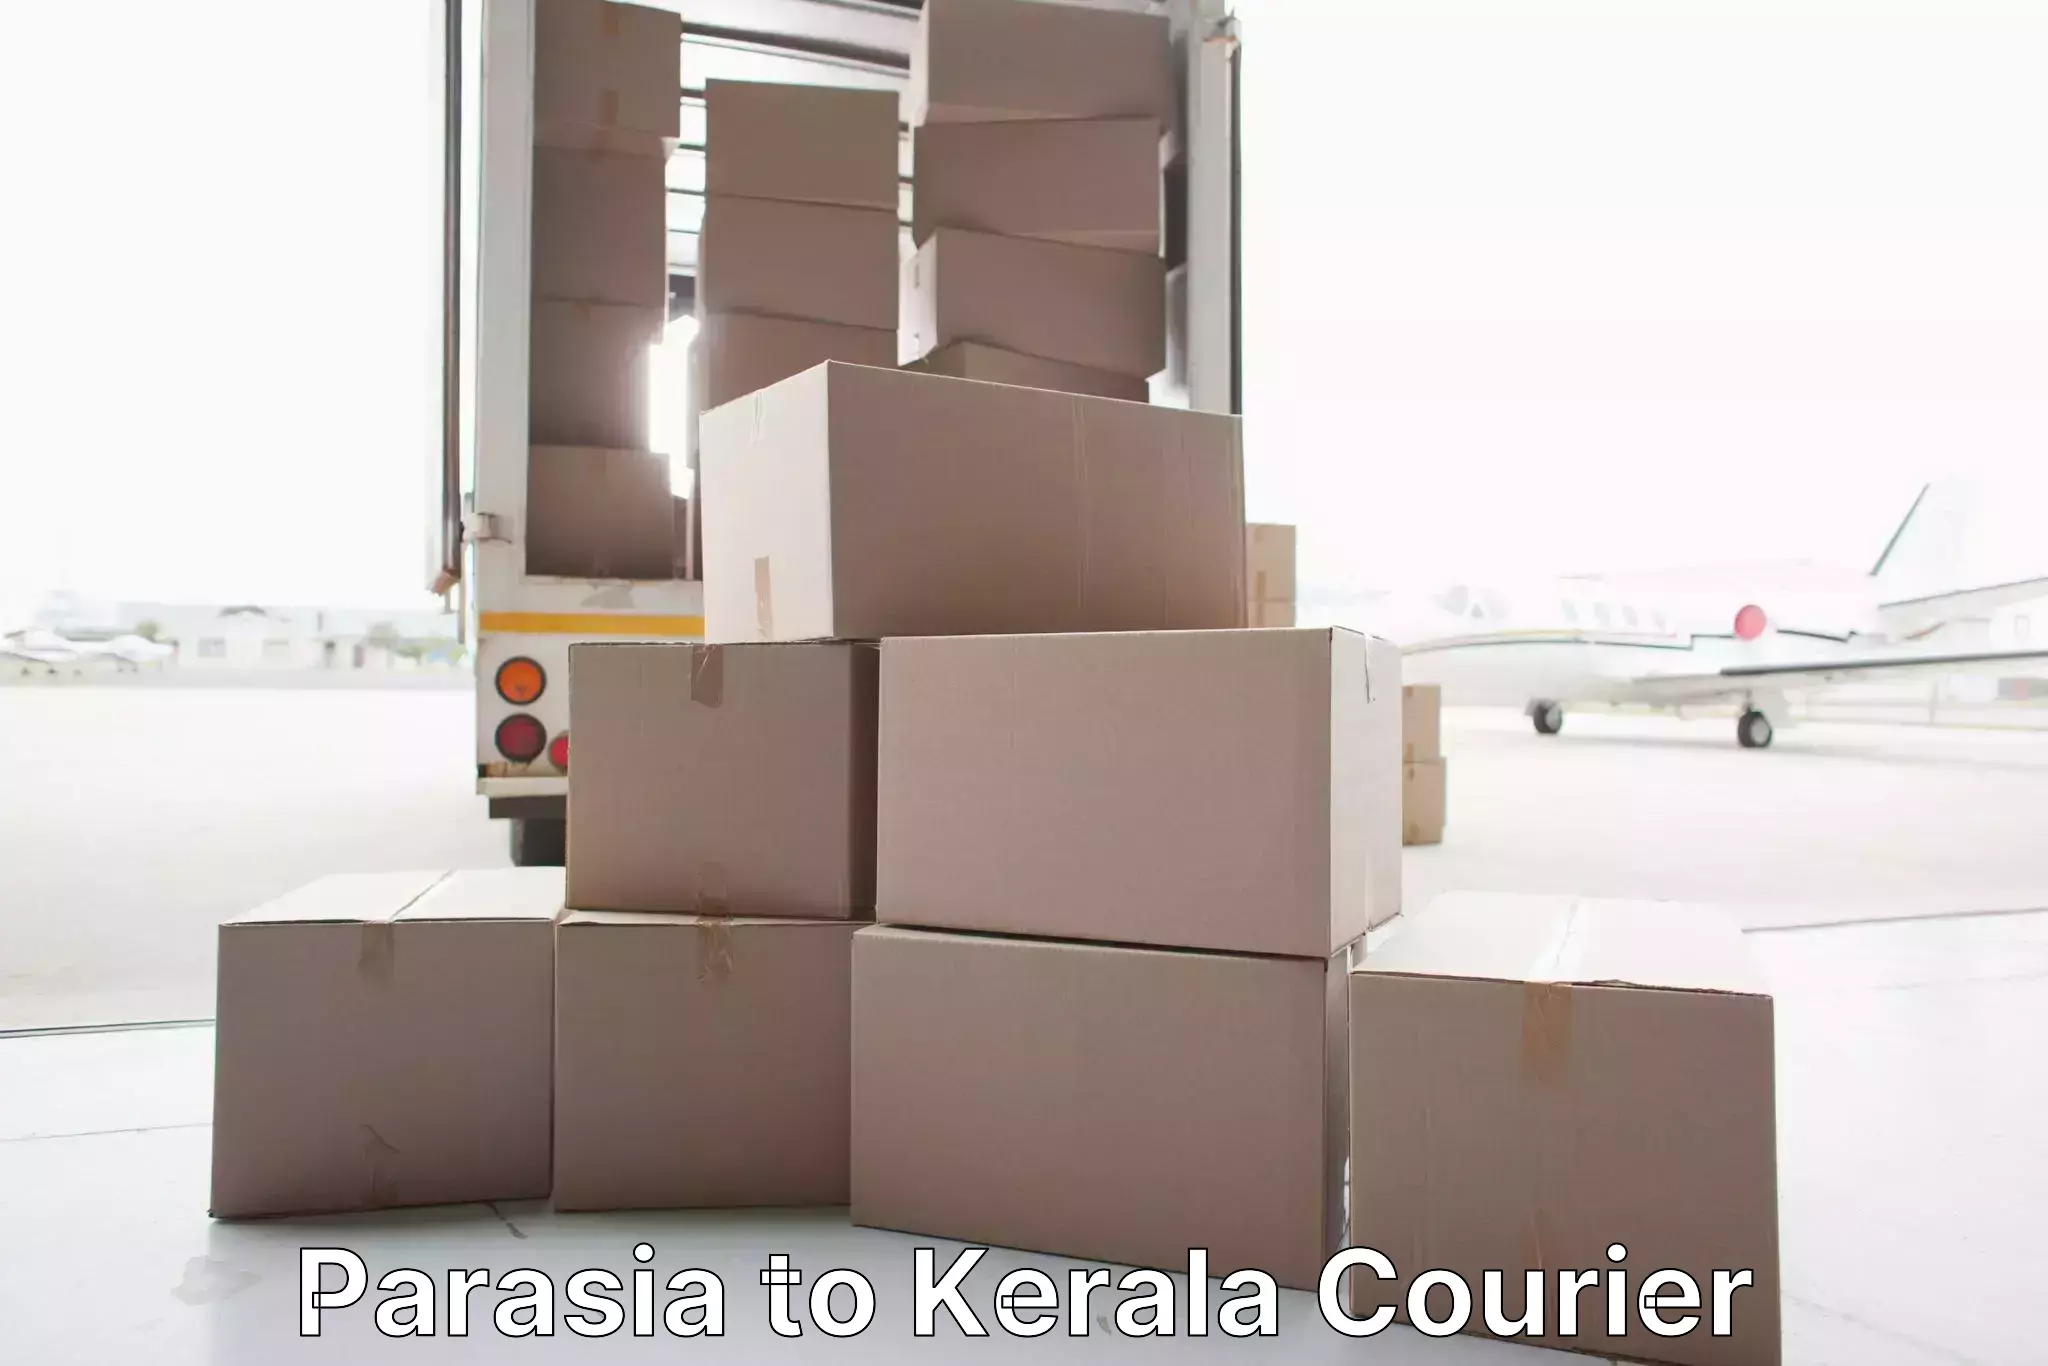 Trusted relocation experts Parasia to Kerala